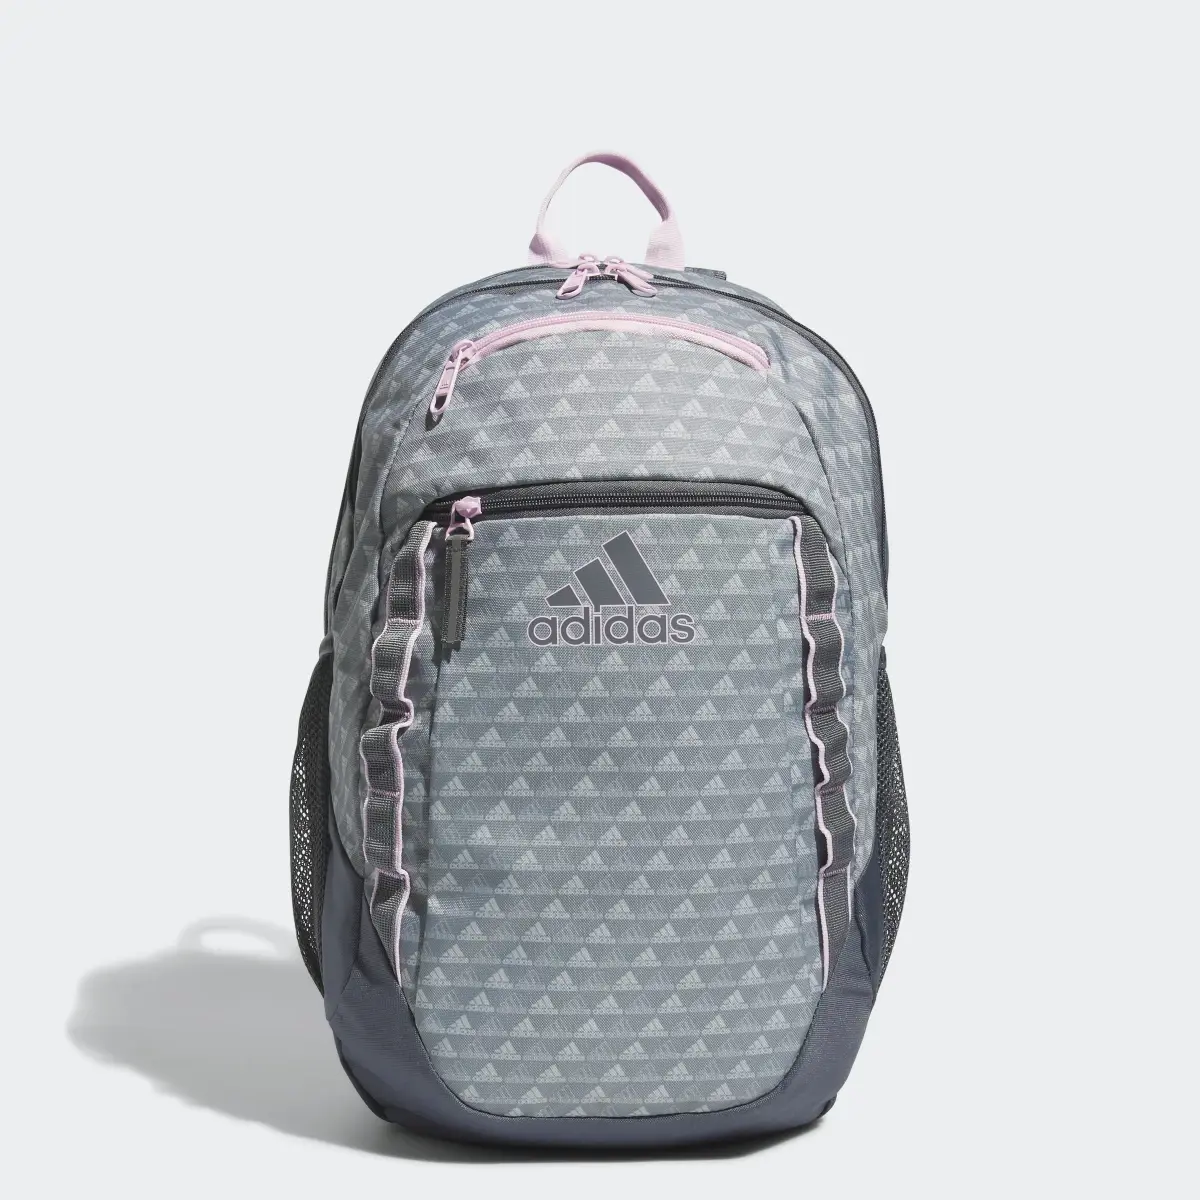 Adidas Excel Backpack. 1